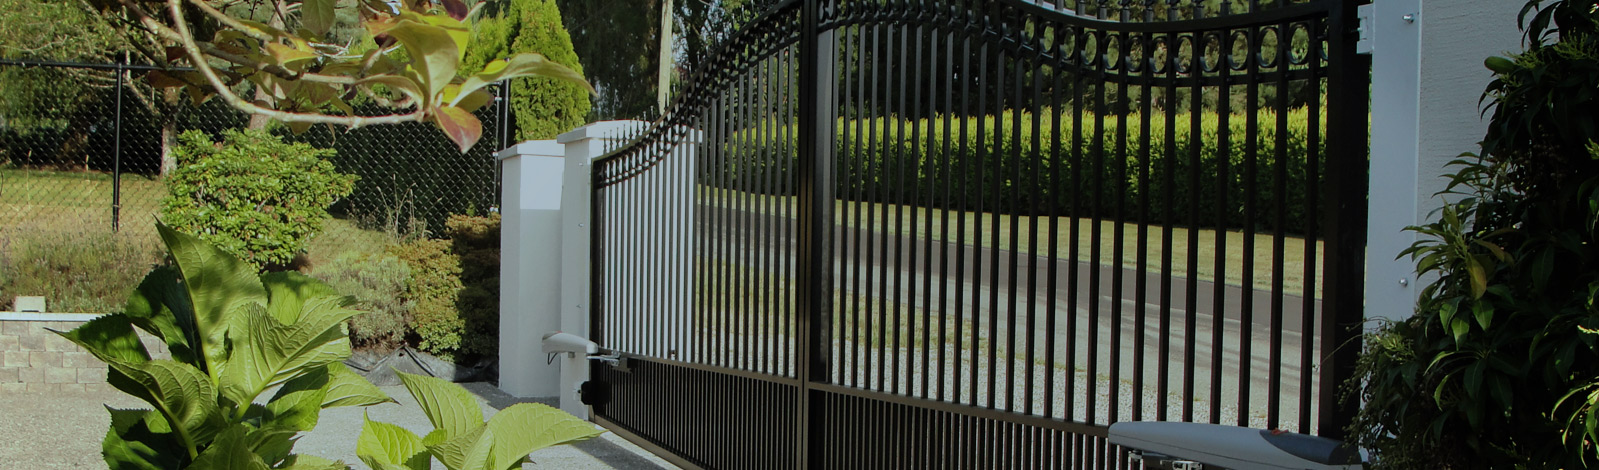 Automatic Gate | Our Process at Pacifica Gates